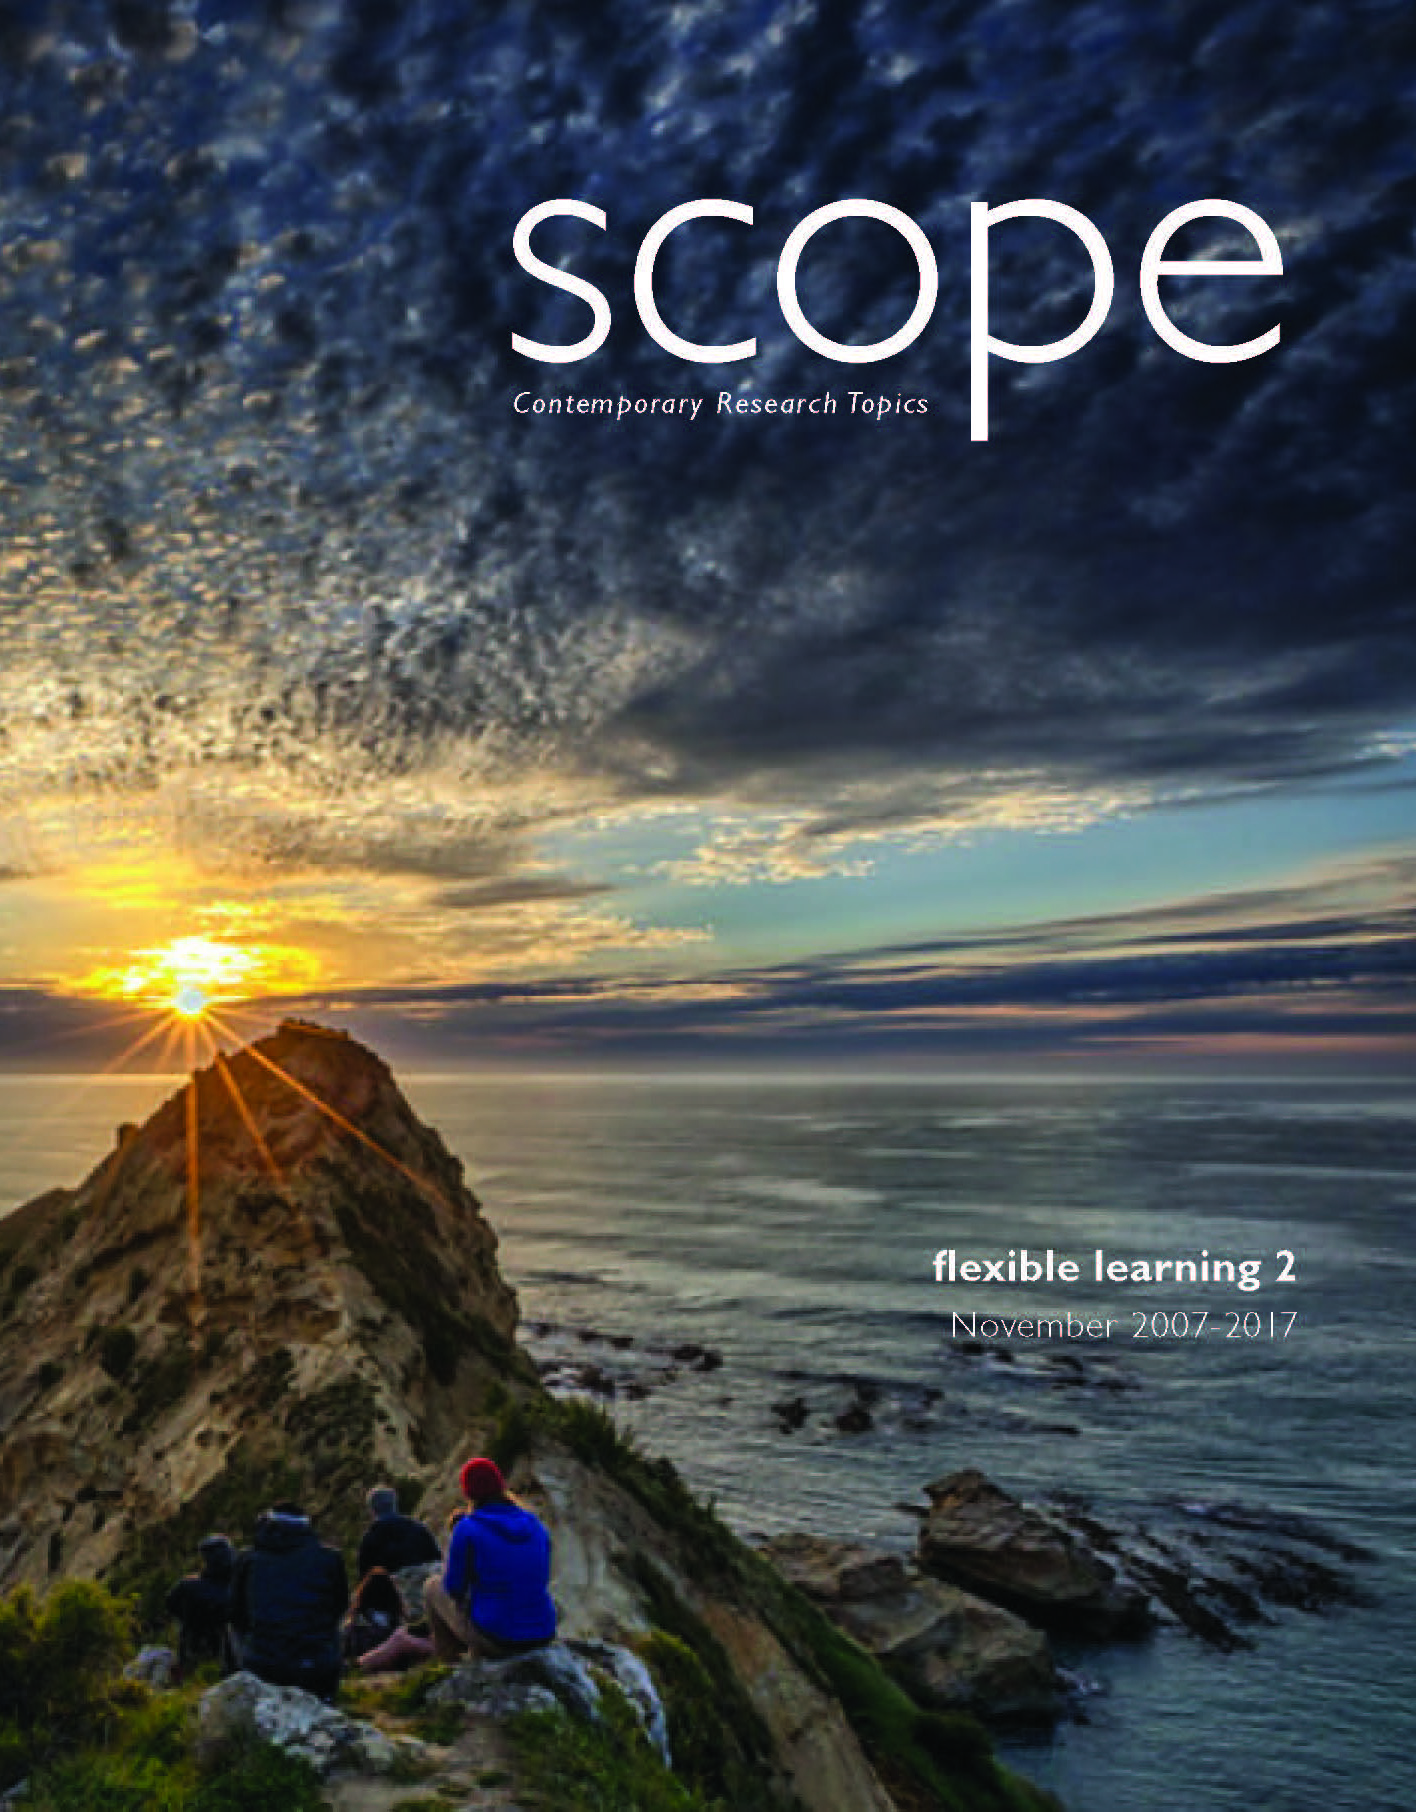 SCOPE Flexible Learning 2 COVER crop